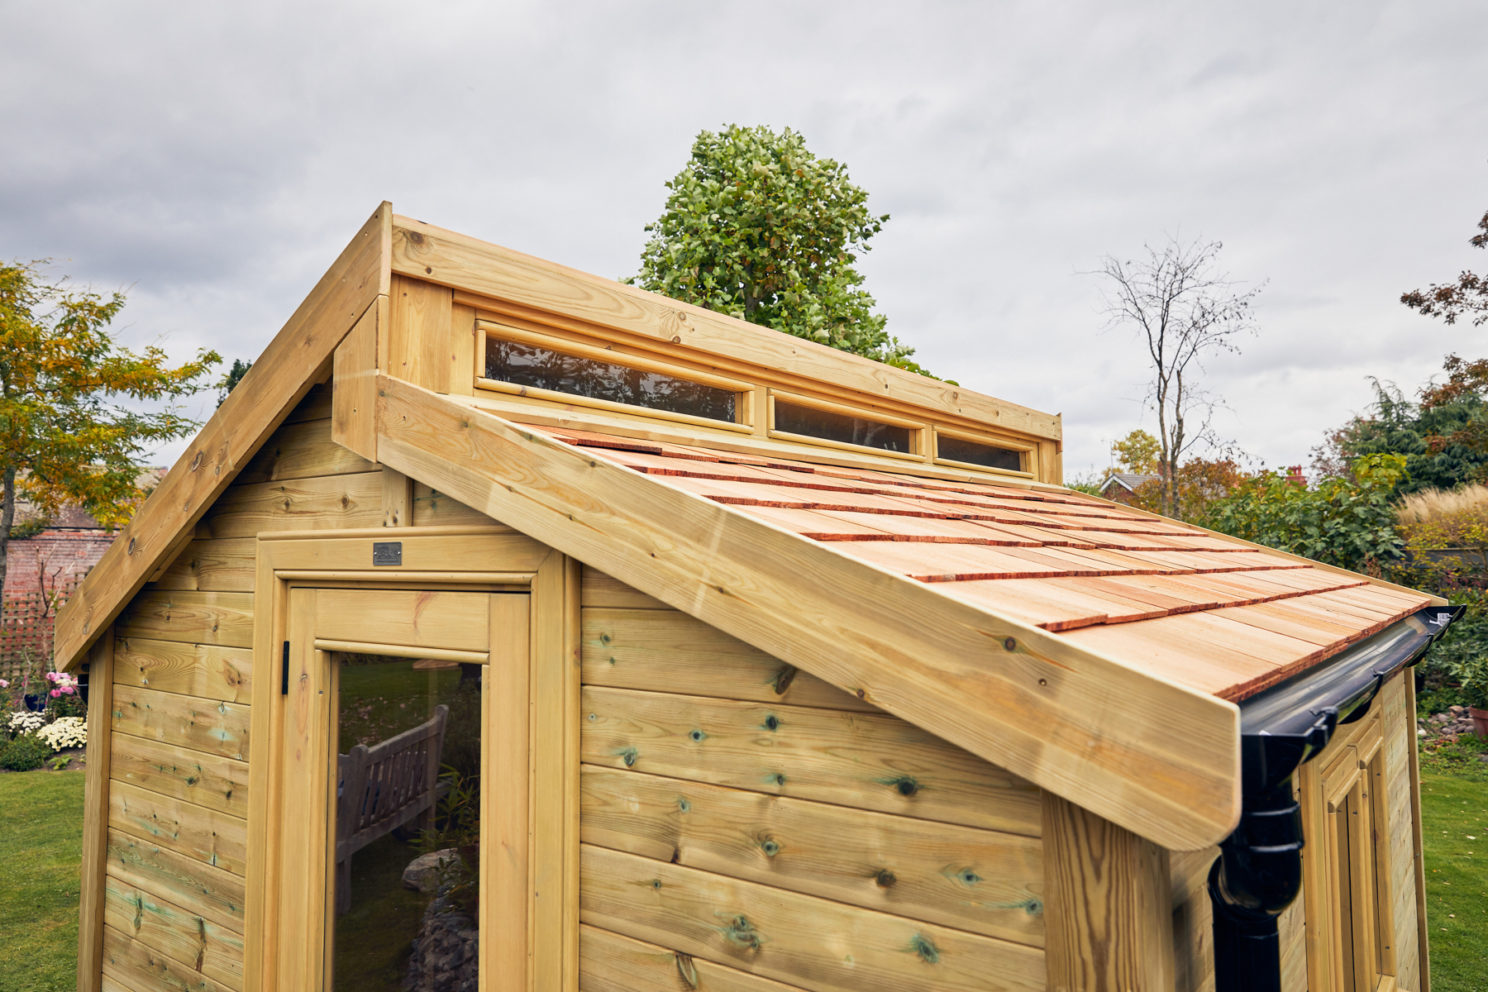 Check the roof and get your posh shed ready for winter